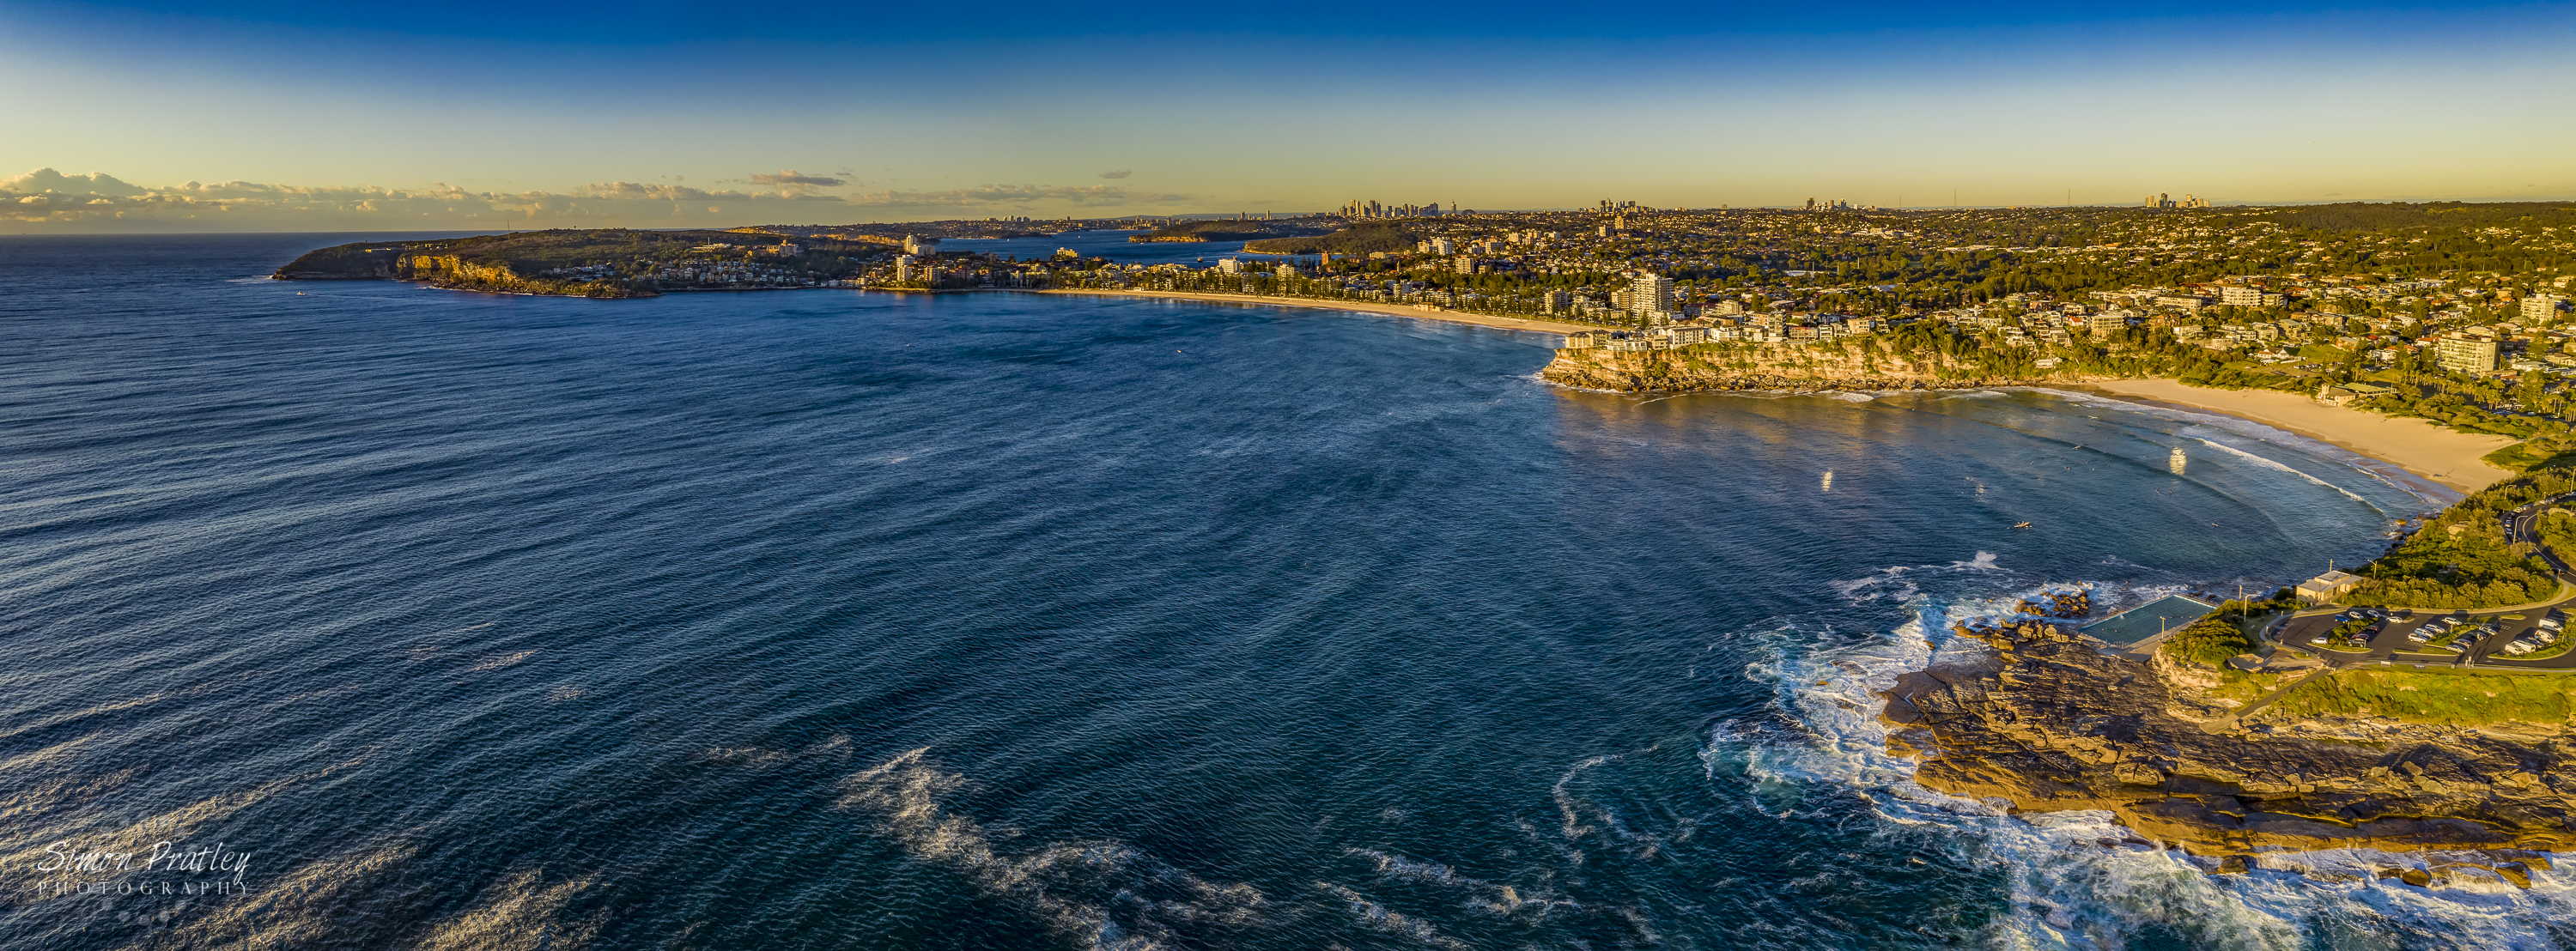 Welcome to a New Day - Freshwater to Manly